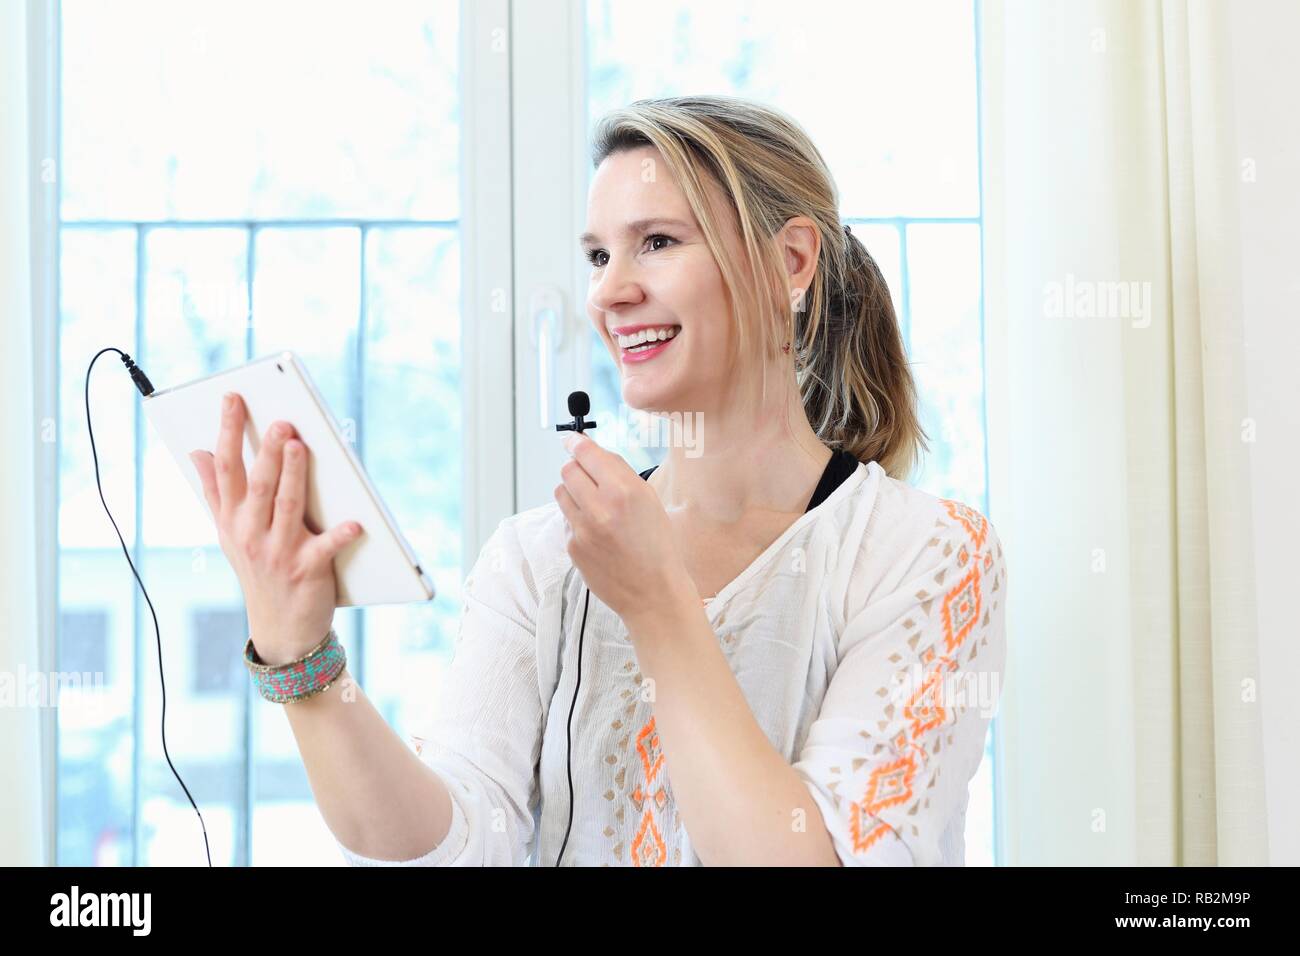 A Woman communicating online in a webinar Blog or internet with tablet PC Stock Photo